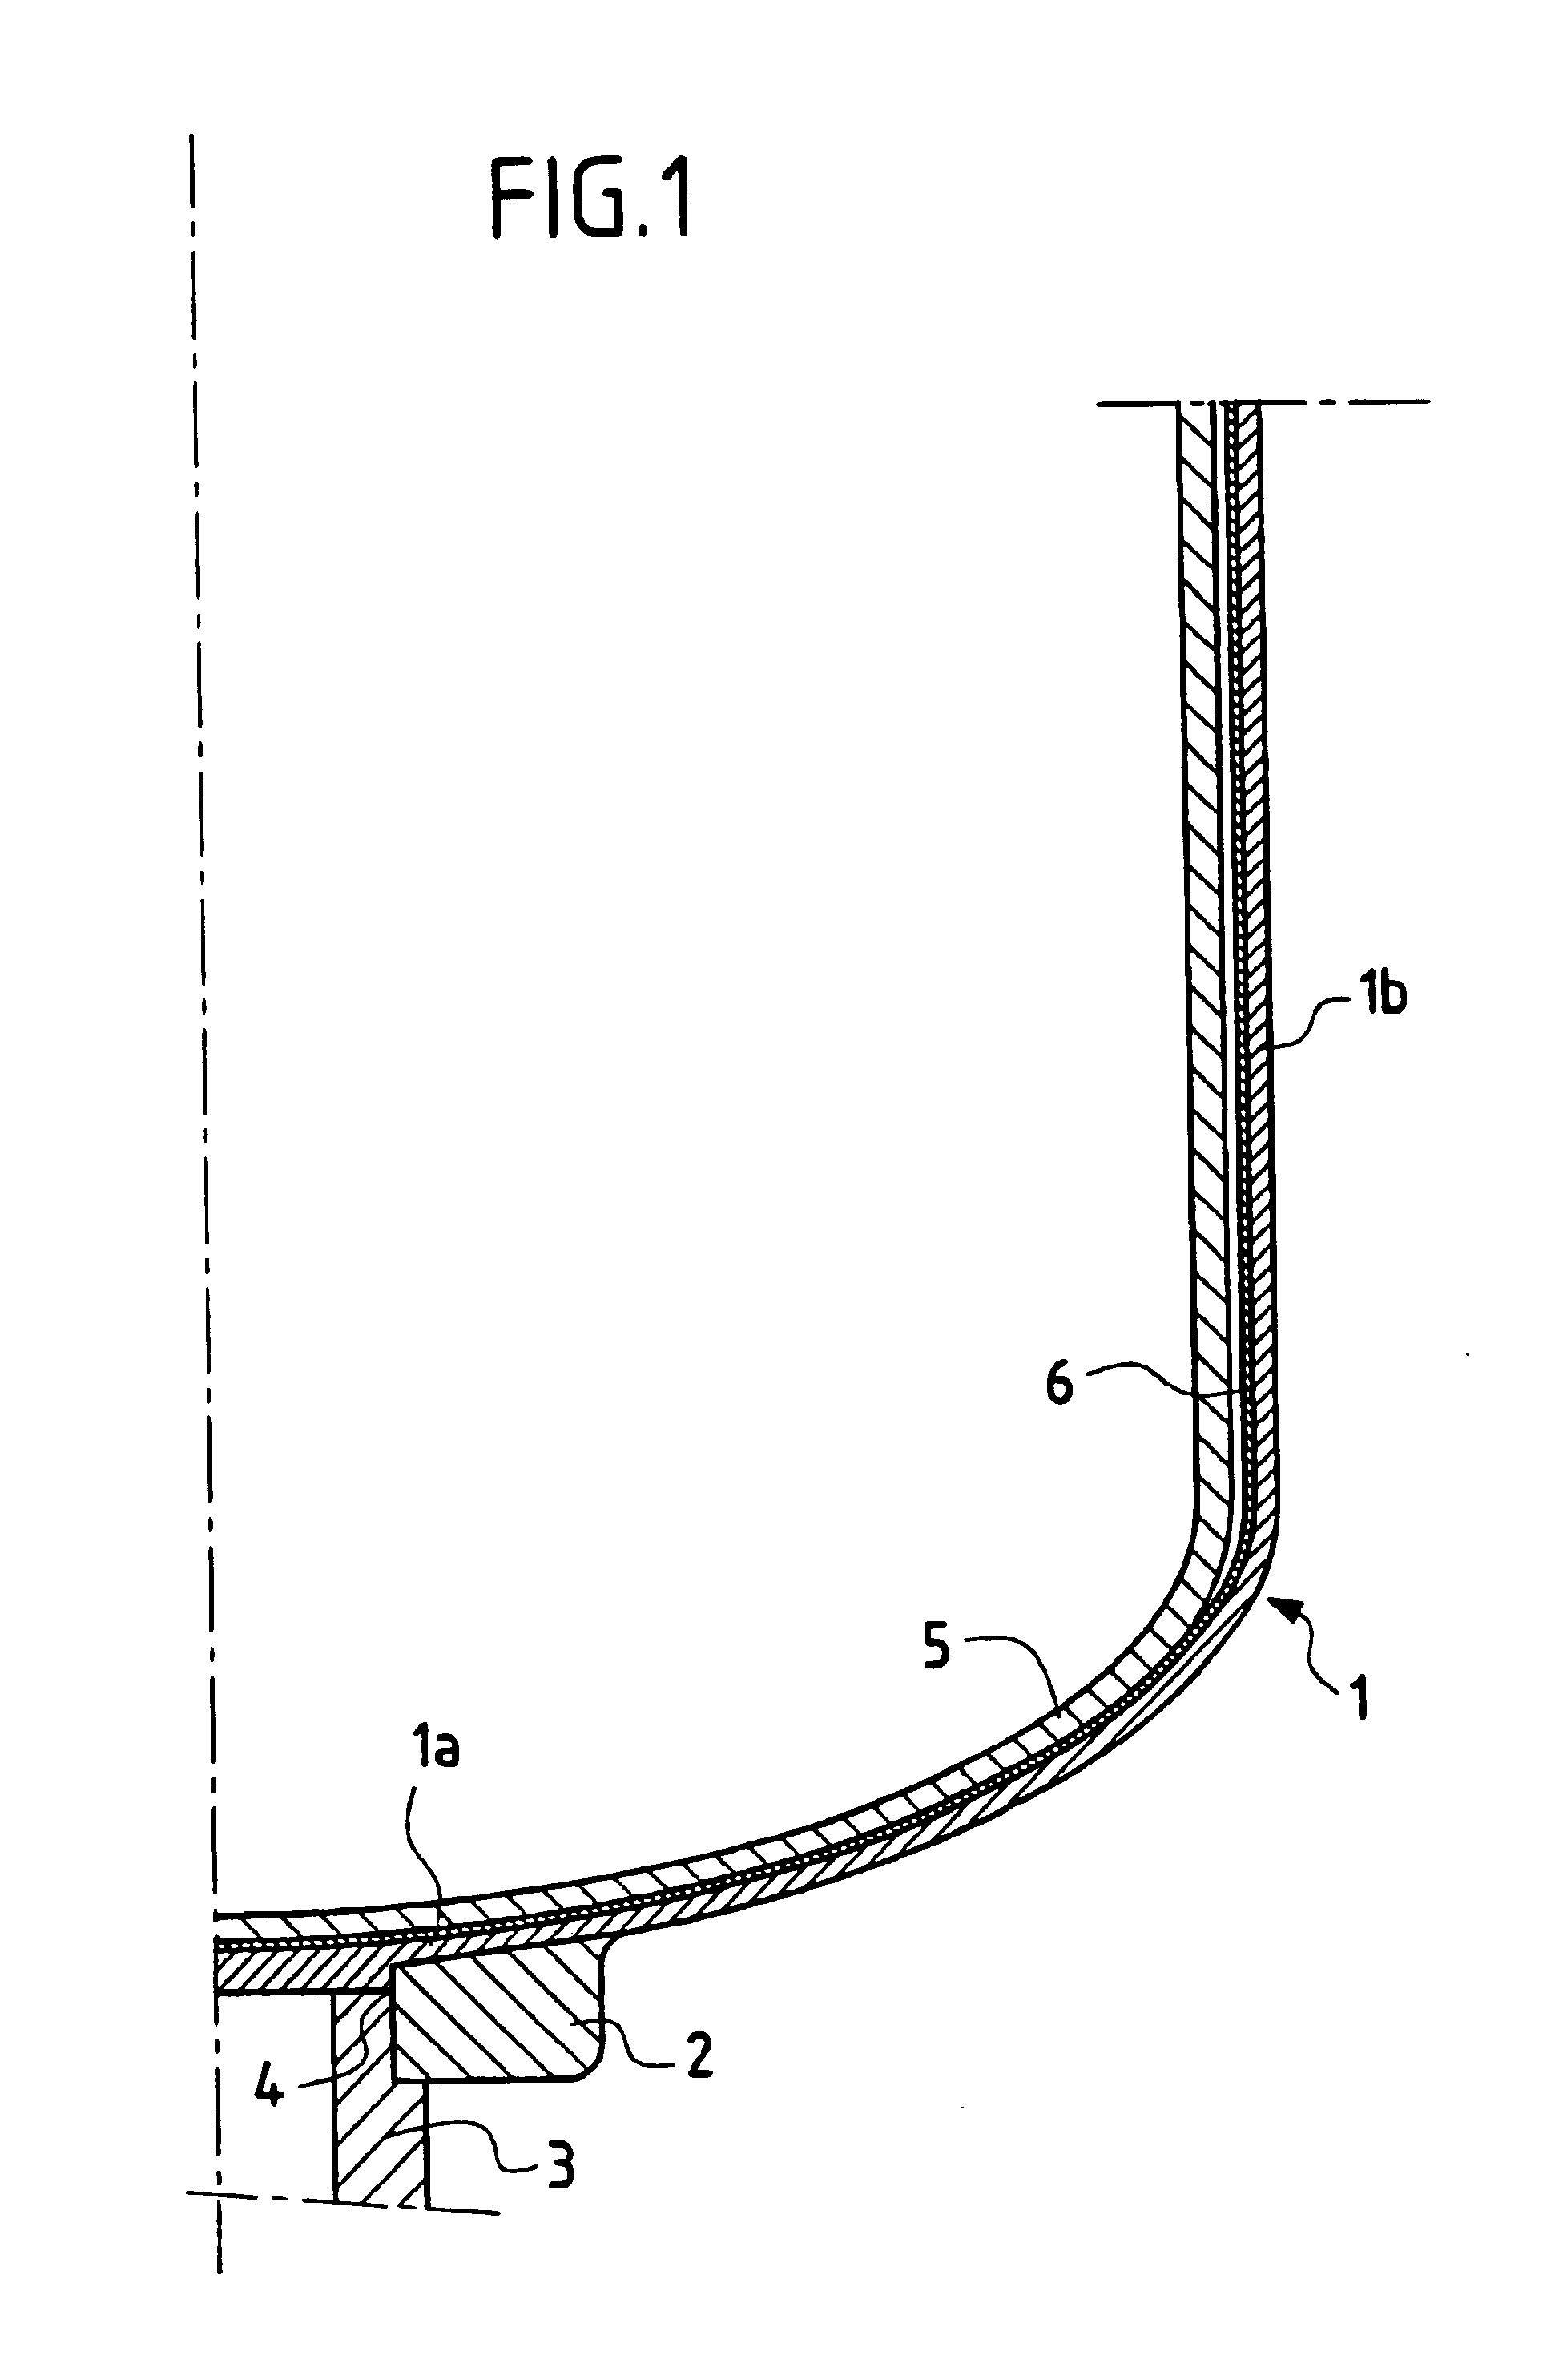 Method for making a bowl in thermostructural composite material